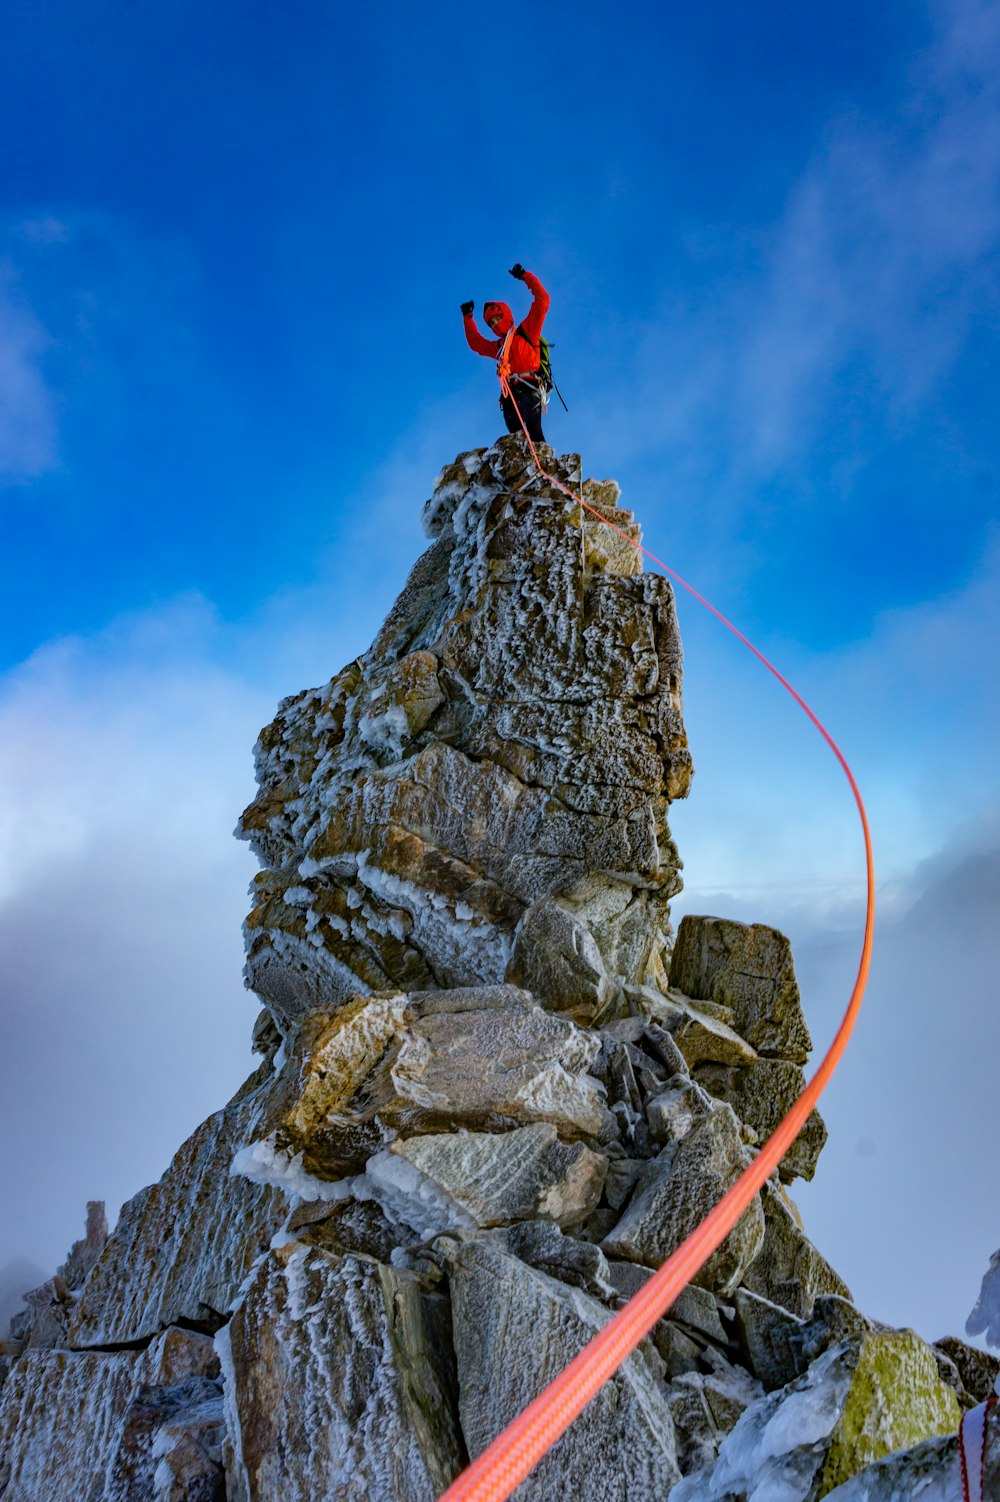 person in red jacket and black pants jumping on rocky mountain under blue sky during daytime